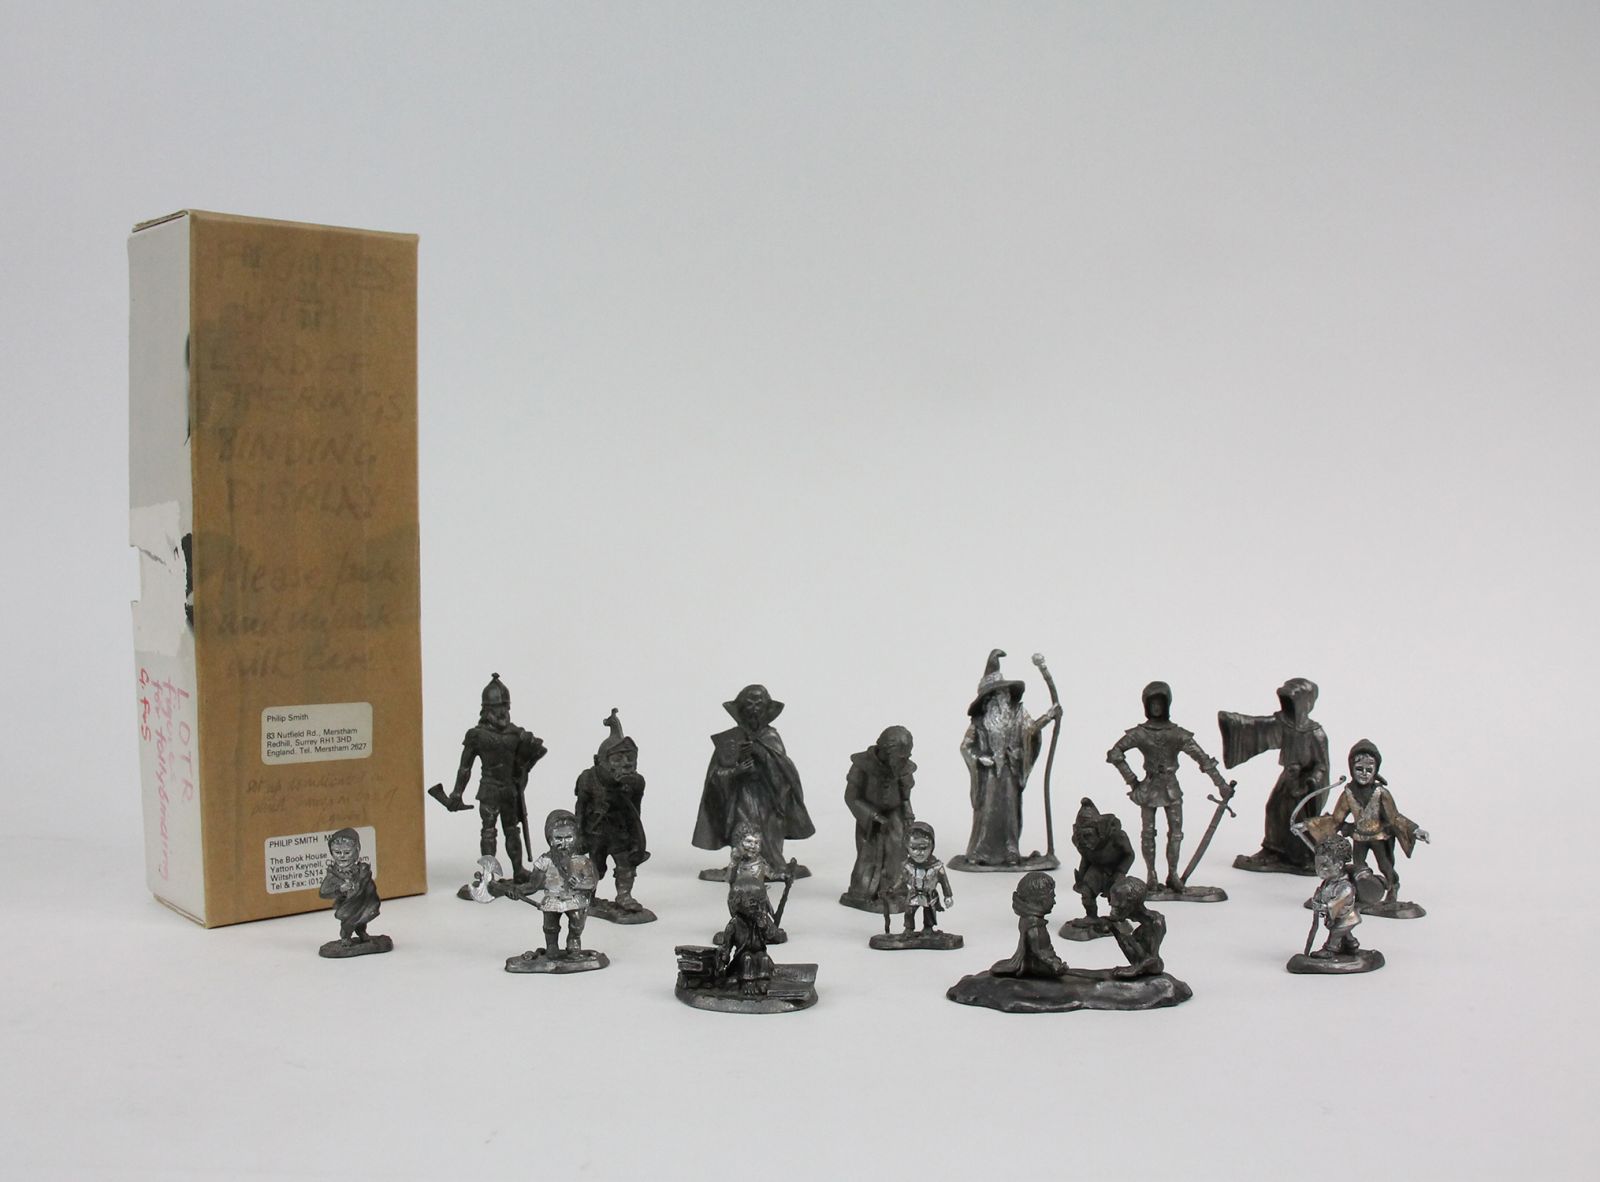 A GROUP OF 16 METAL FIGURES FOR DISPLAY WITH PHILIP SMITH'S LORD OF THE RINGS BOOK BINDINGS -  image 1